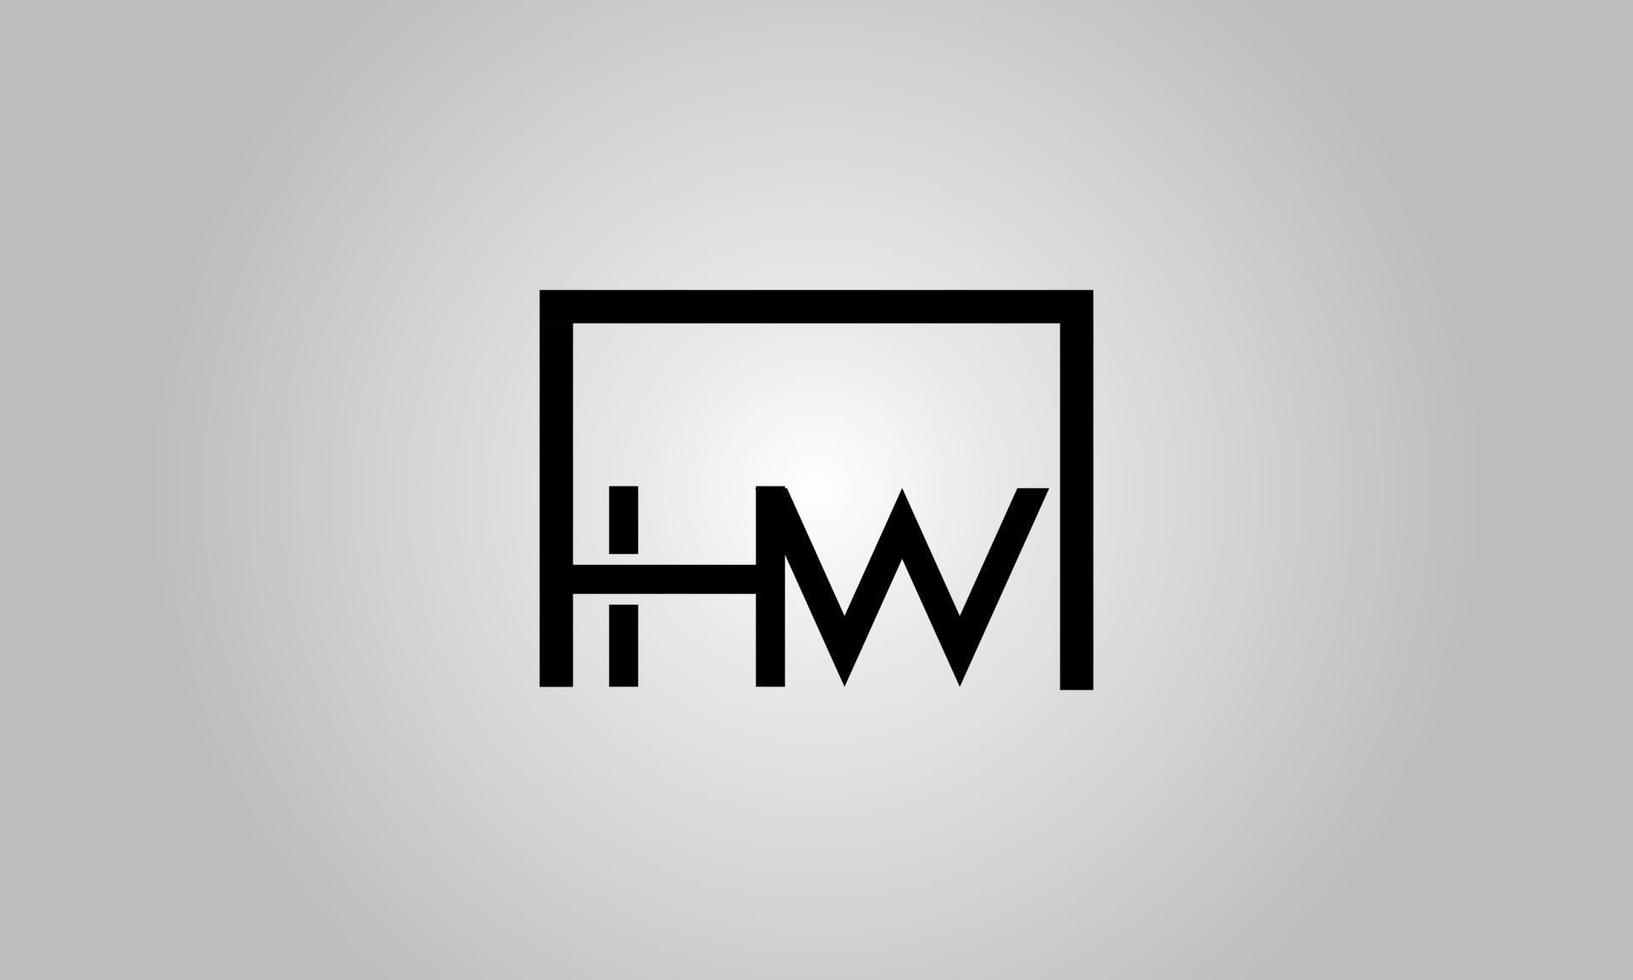 Letter HW logo design. HW logo with square shape in black colors vector free vector template.